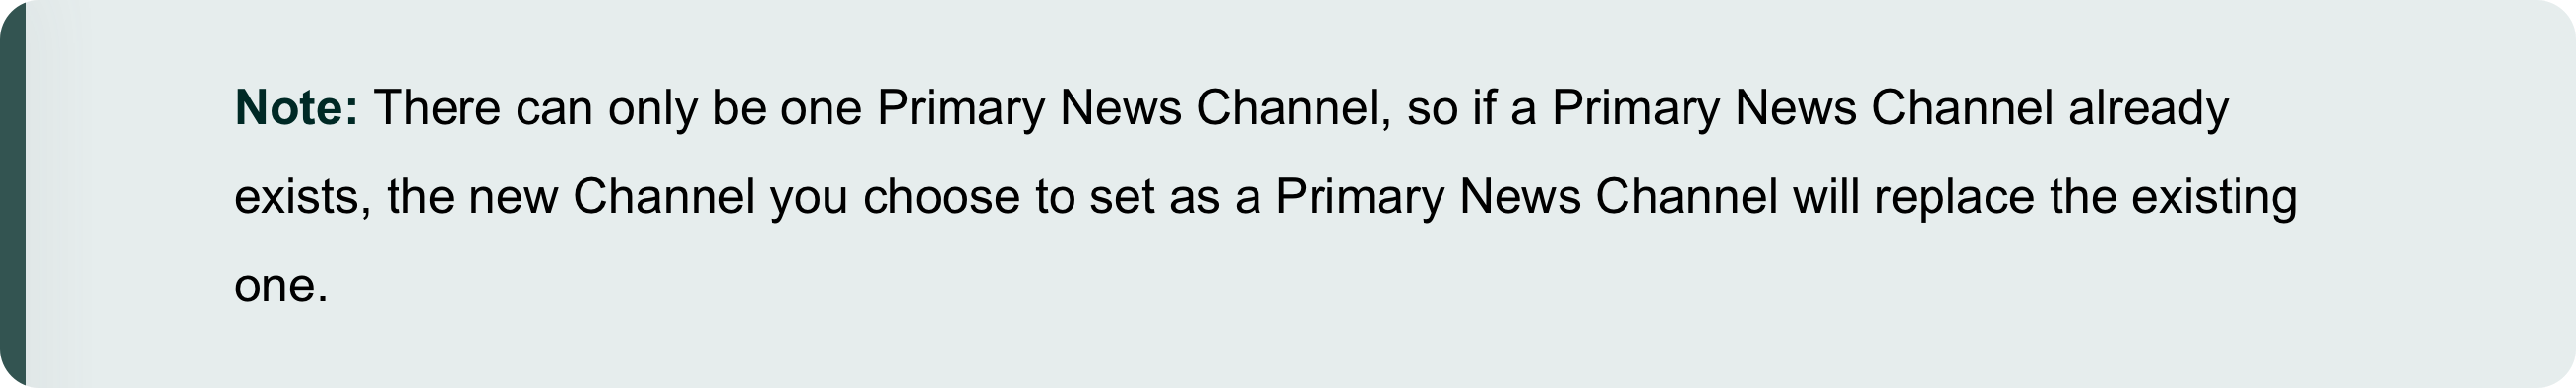 Primary_and_Secondary_News_Channels_3.png